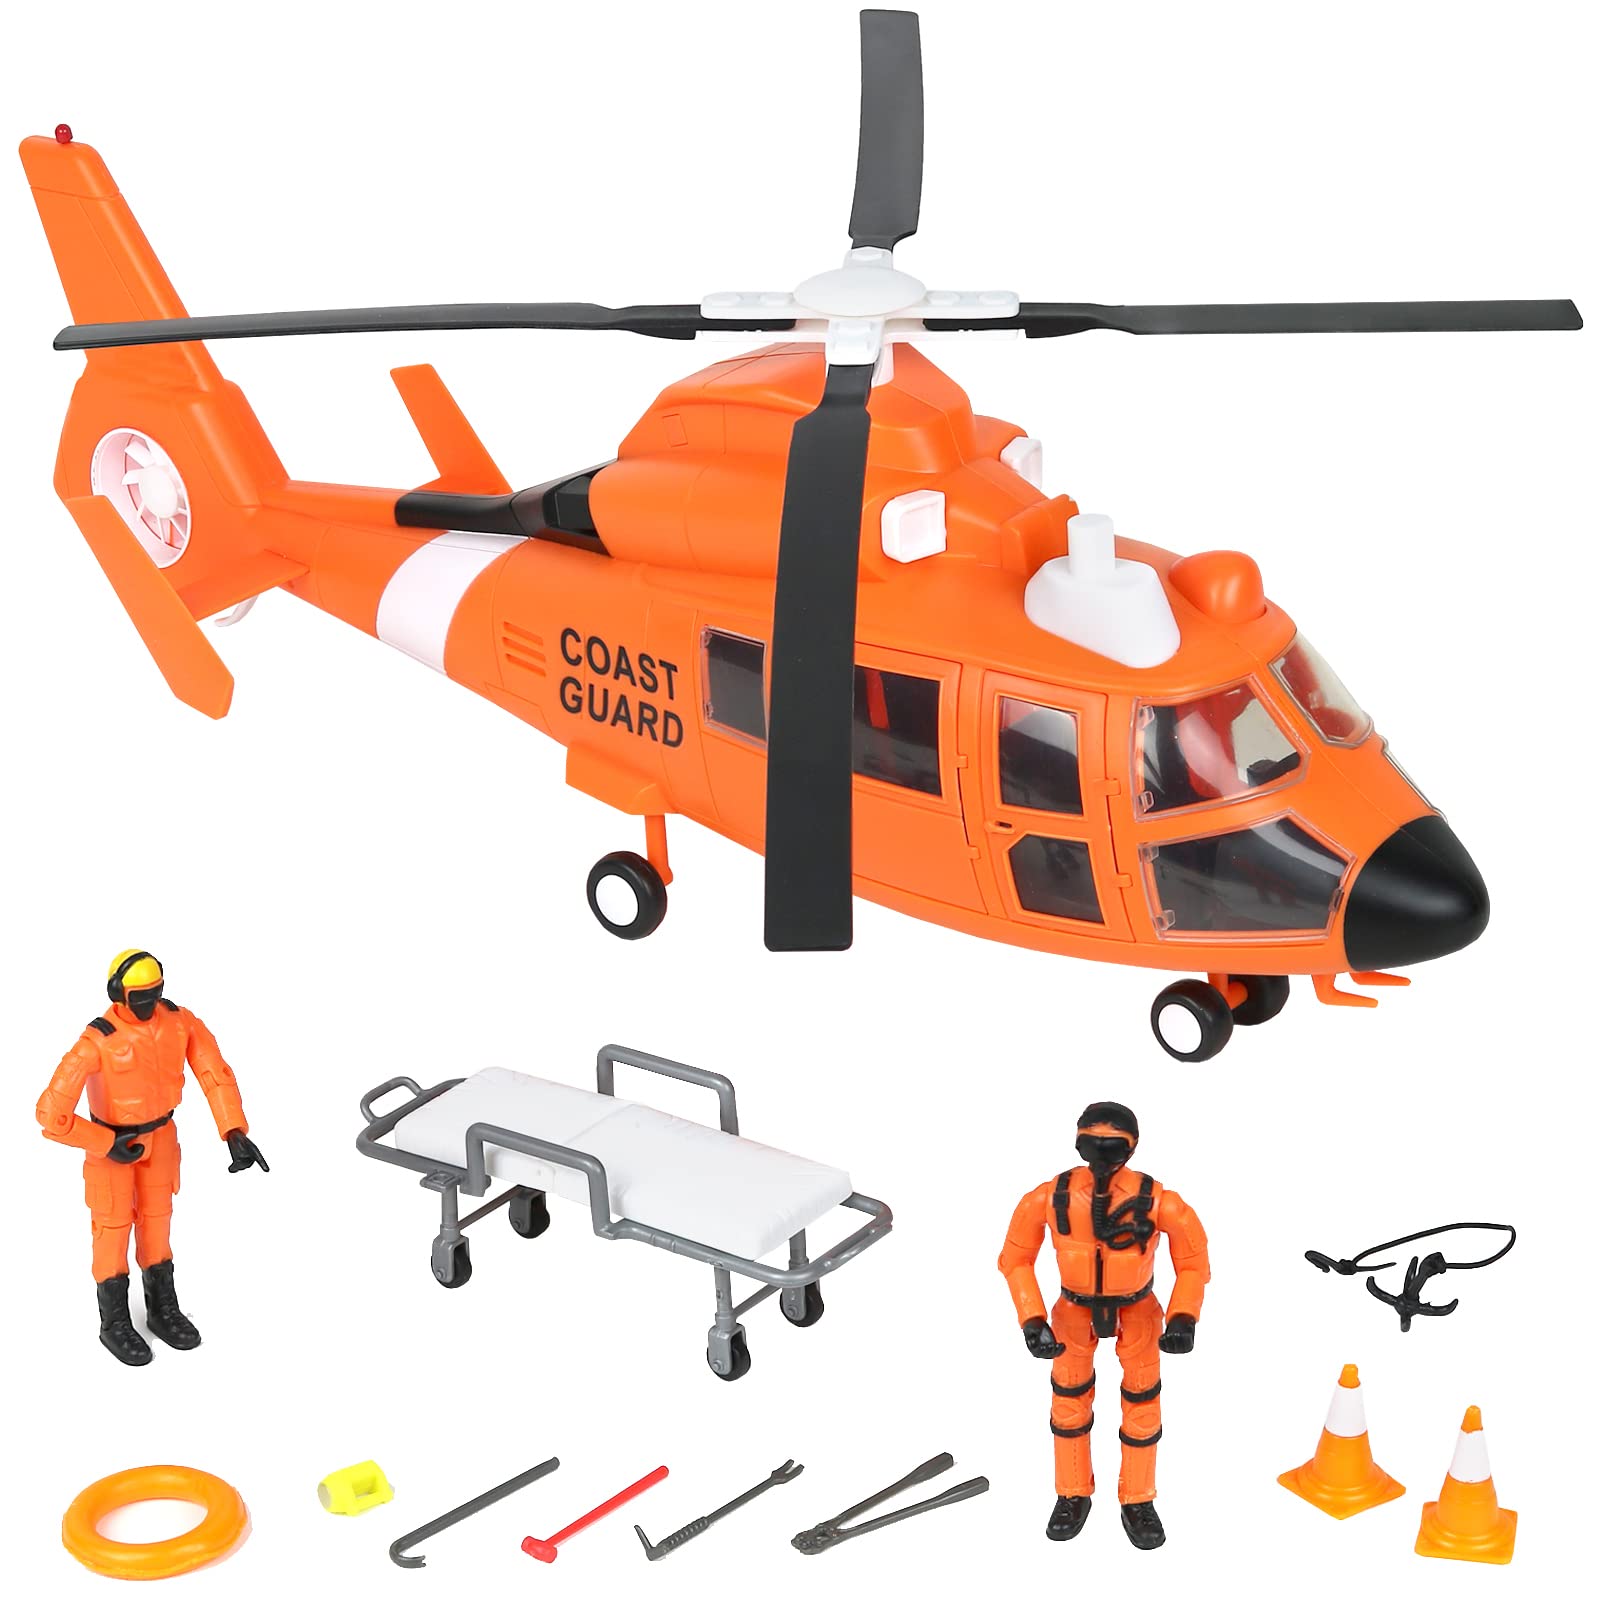 Click N' Play Toy Helicopter Set, Coast Guard Rescue Helicopter for Kids, 13-Piece Play Set Including Coast Guard Action Figures & Accessories , Orange